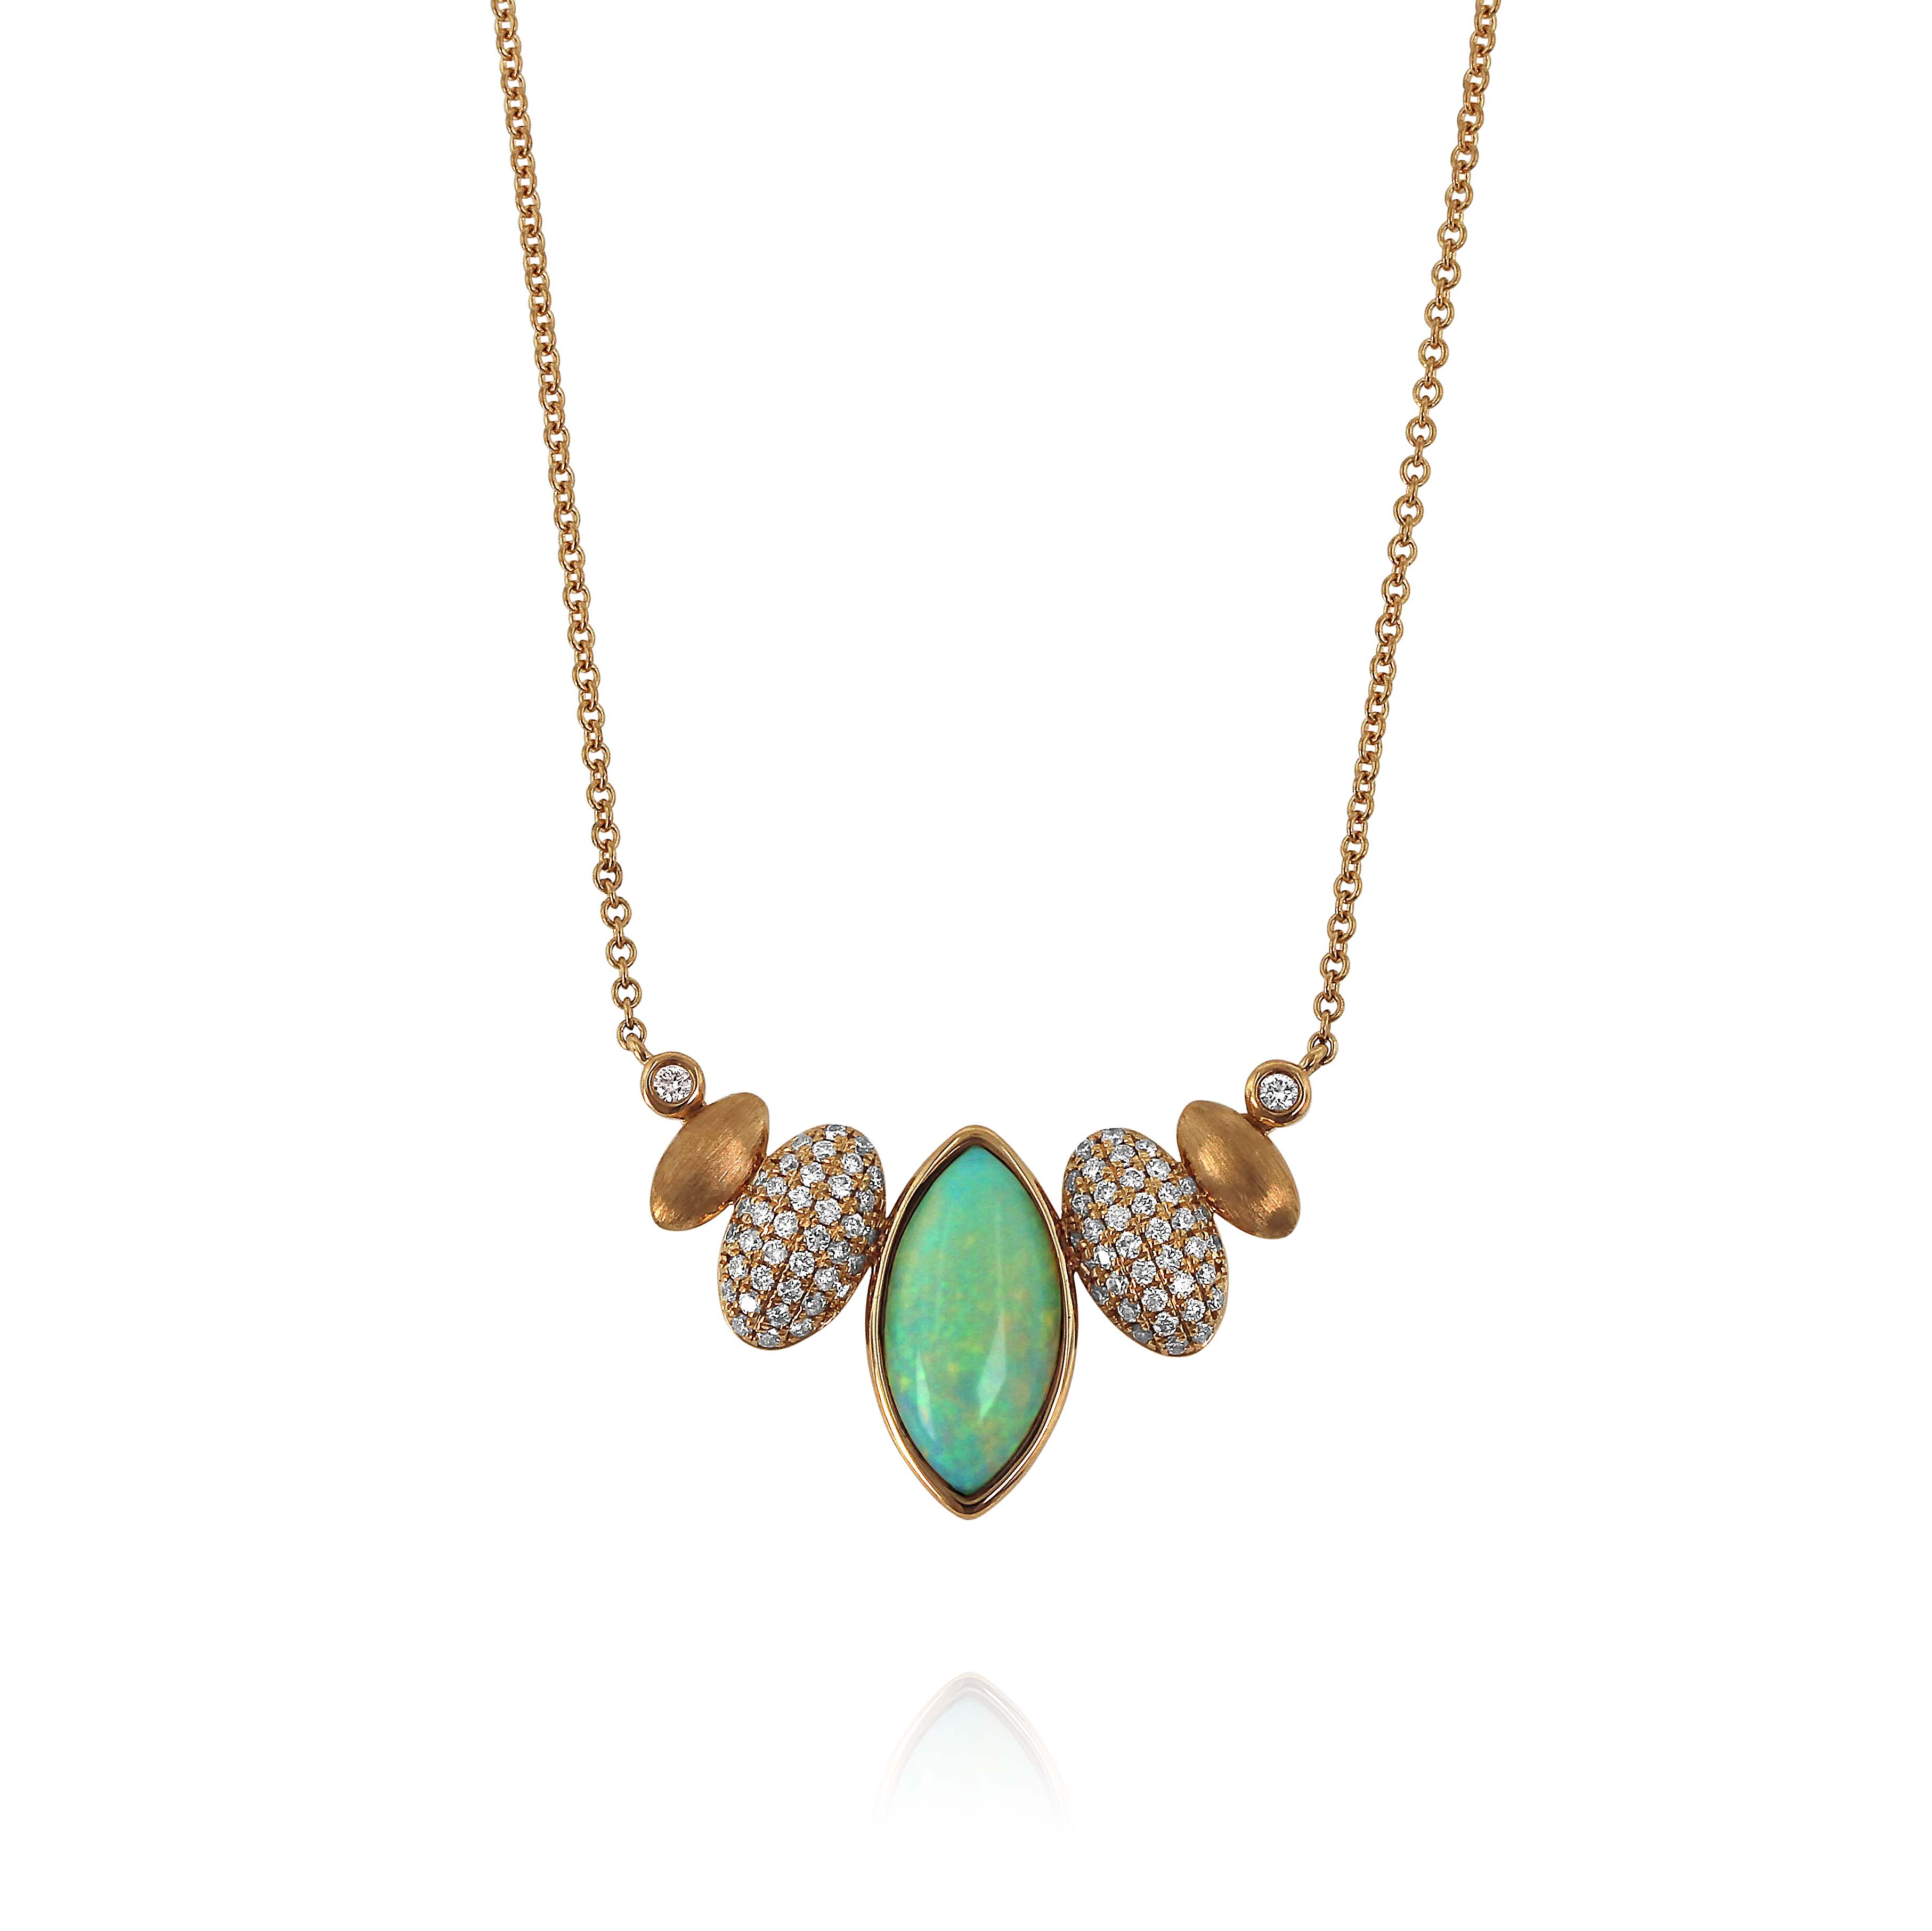 Toi & Moi opal and diamond necklace by Yael